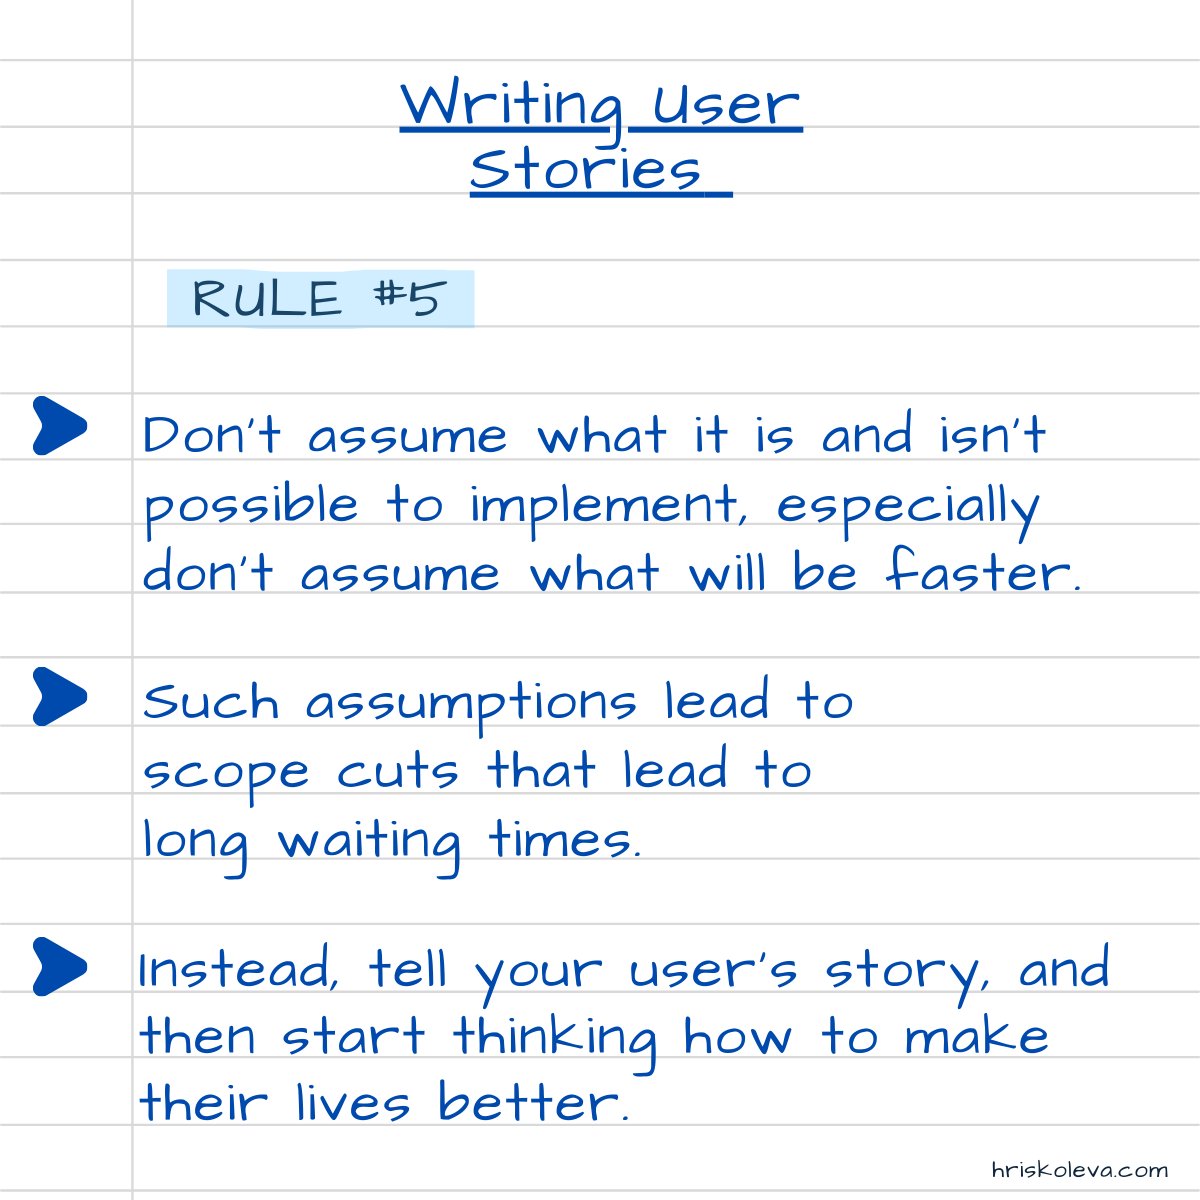 #userstories #productmanagement #qualityculture